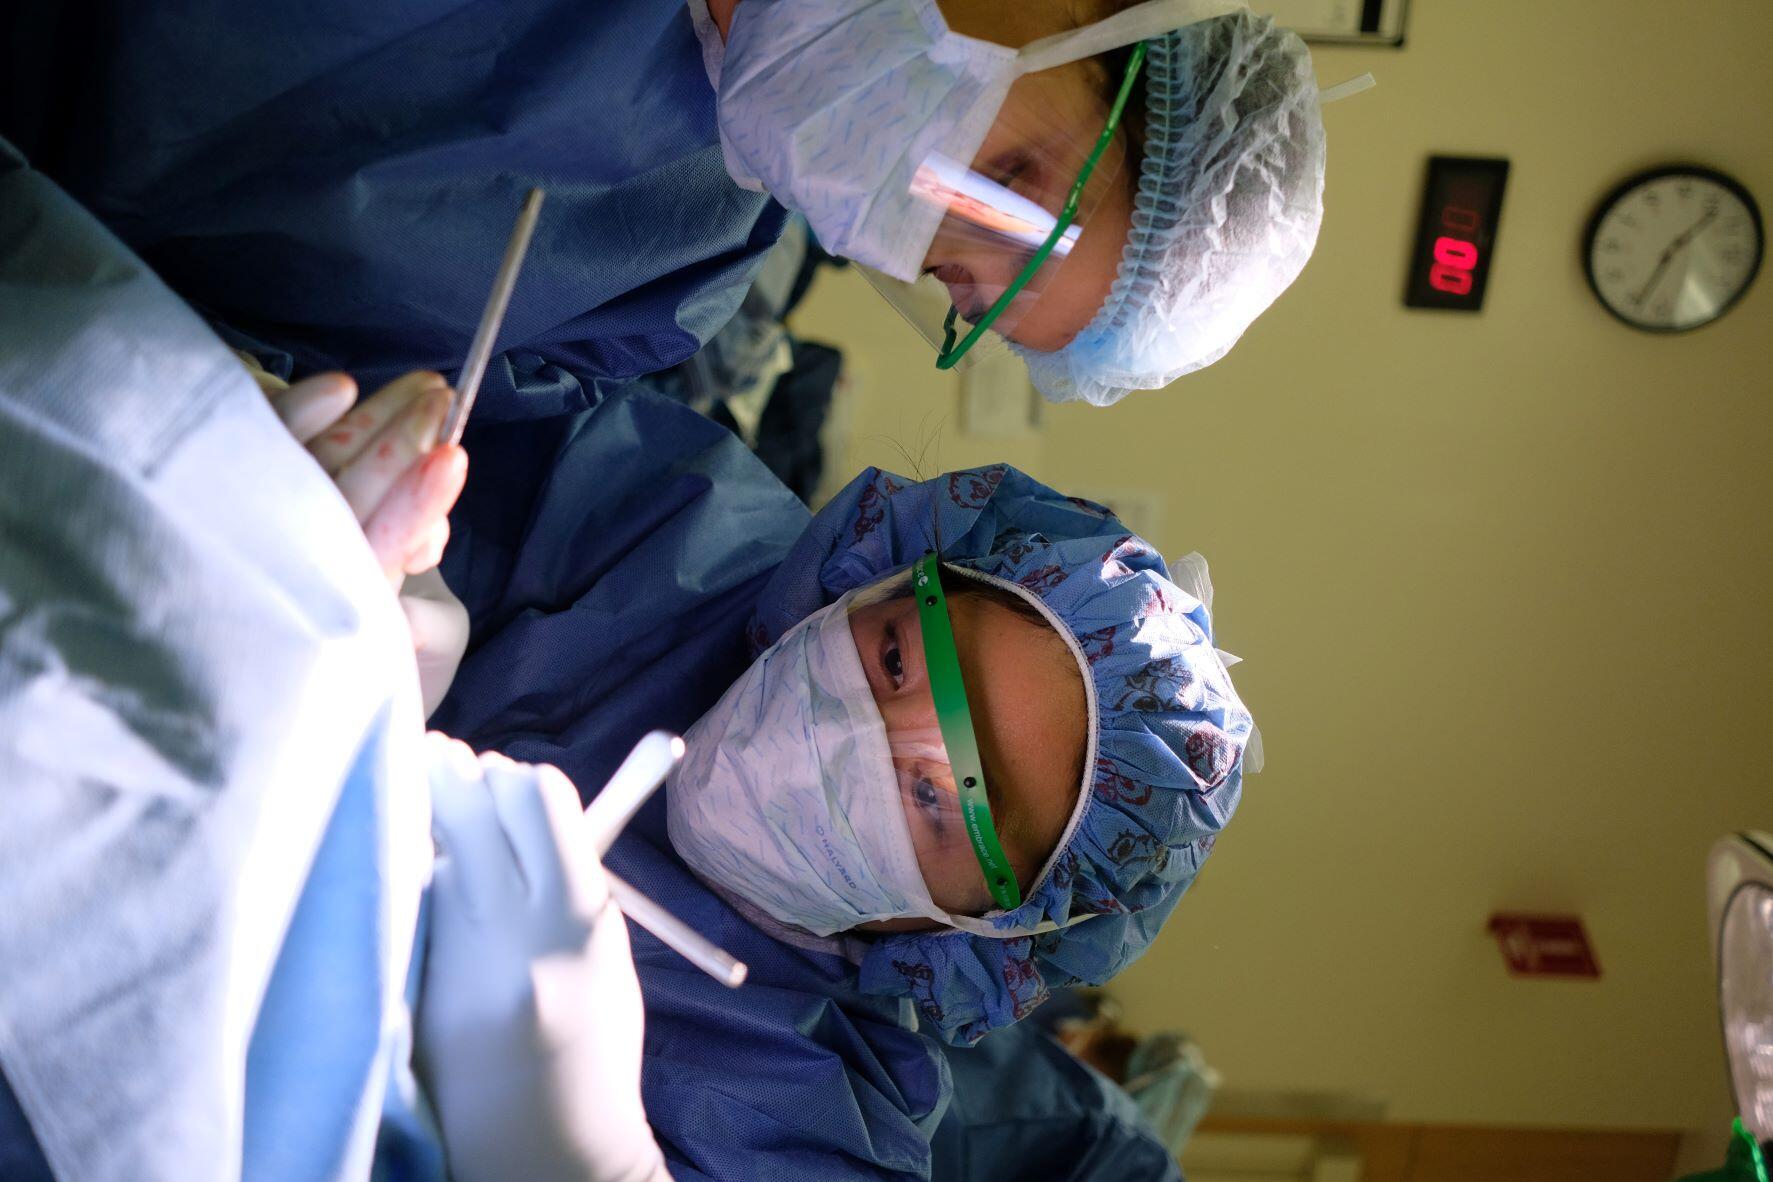 Residents performing an ENT procedure